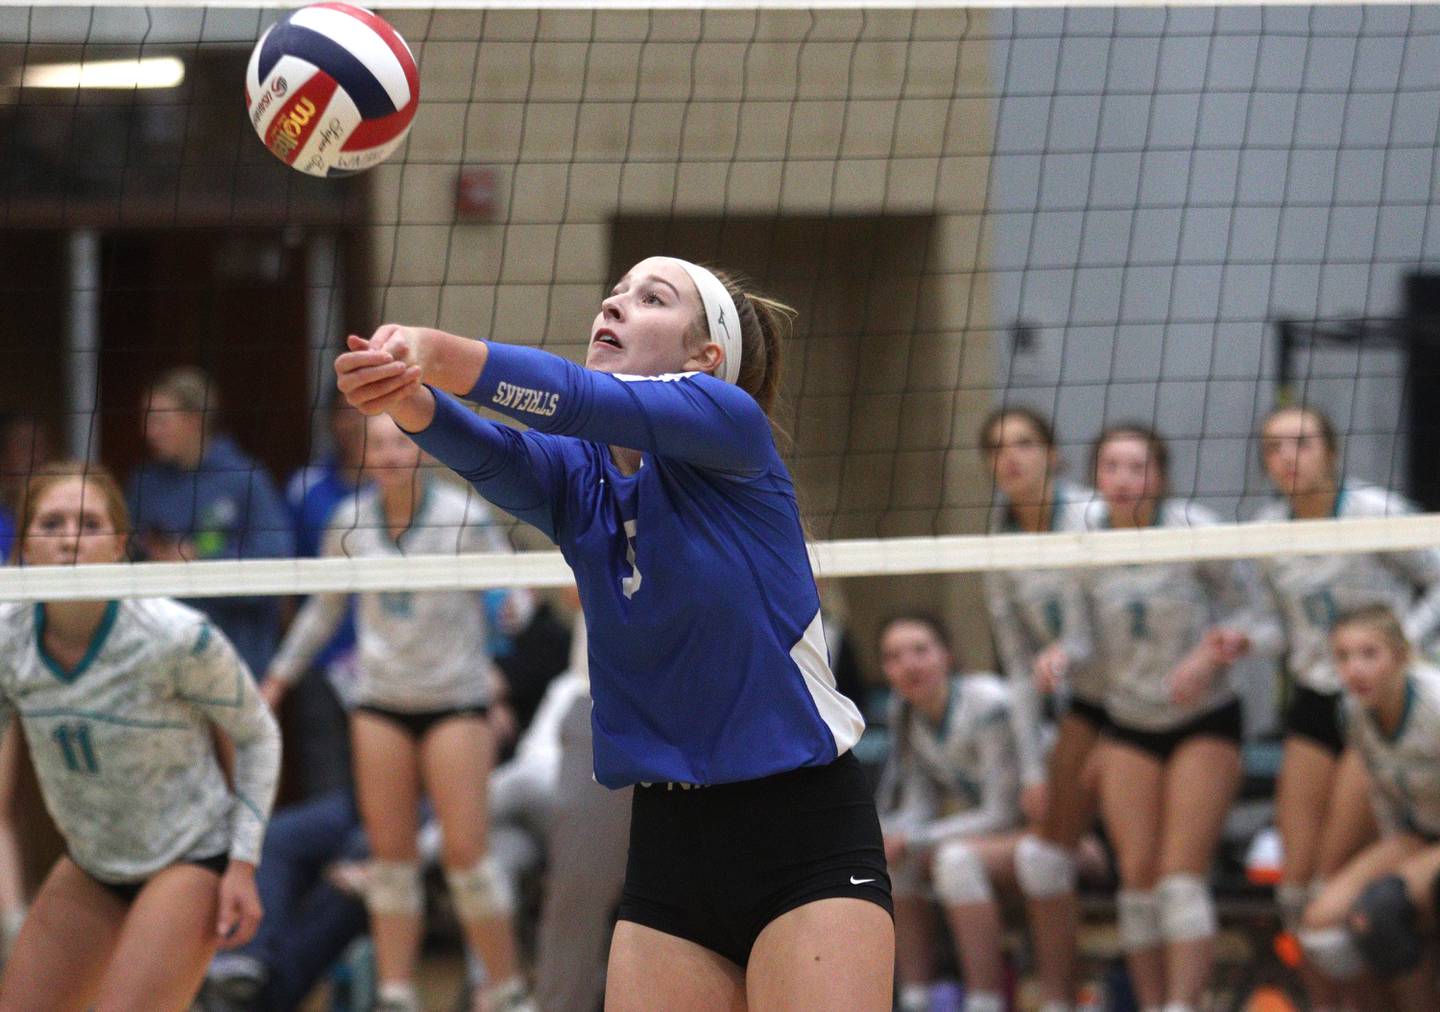 Woodstock’s Julia Laidig passes the ball in varsity volleyball at Woodstock North Monday night.